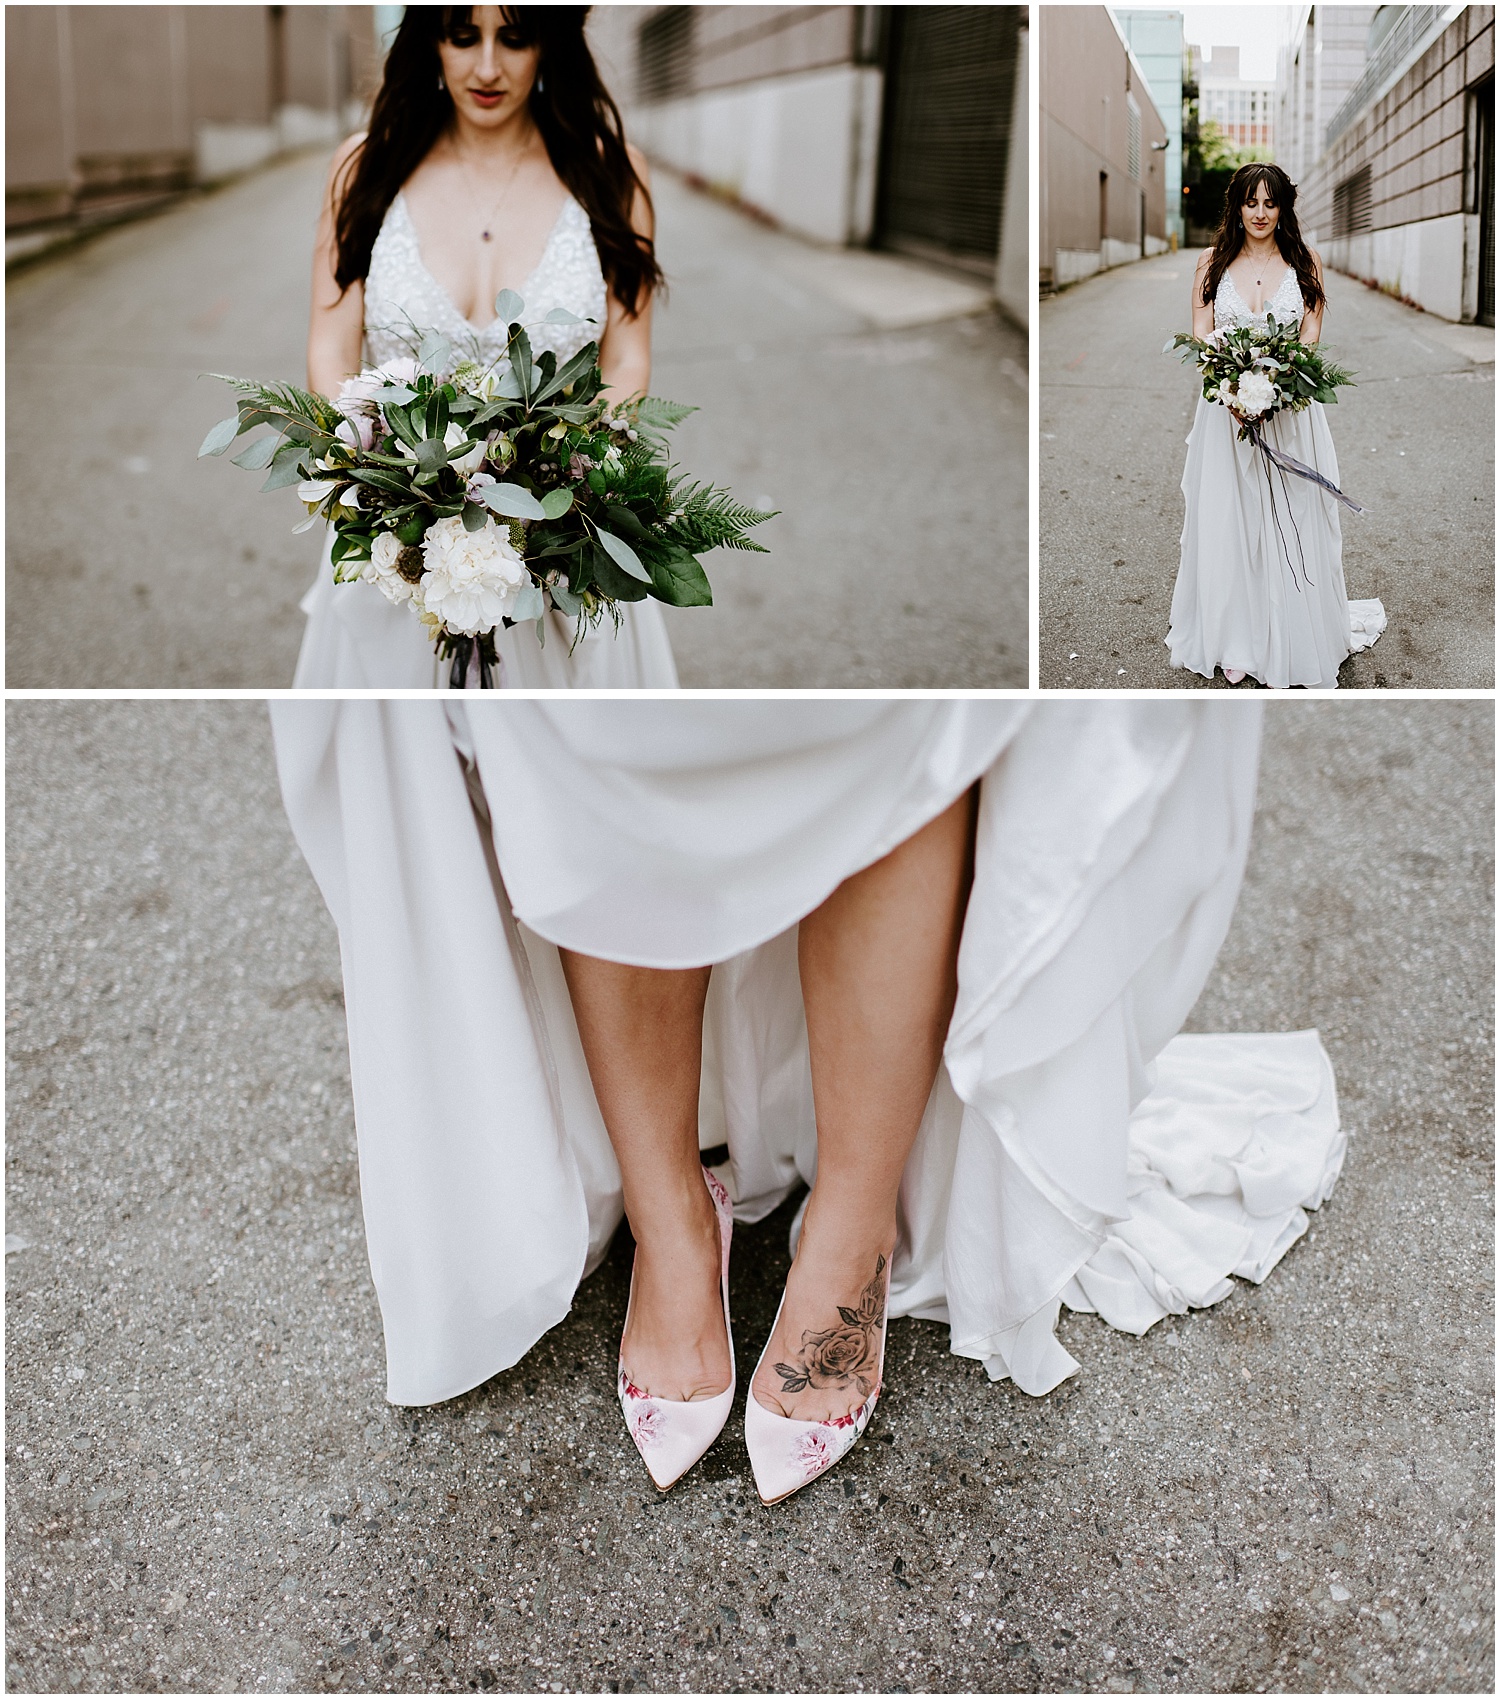 urban bridal portraits in downtown vancouver back alley